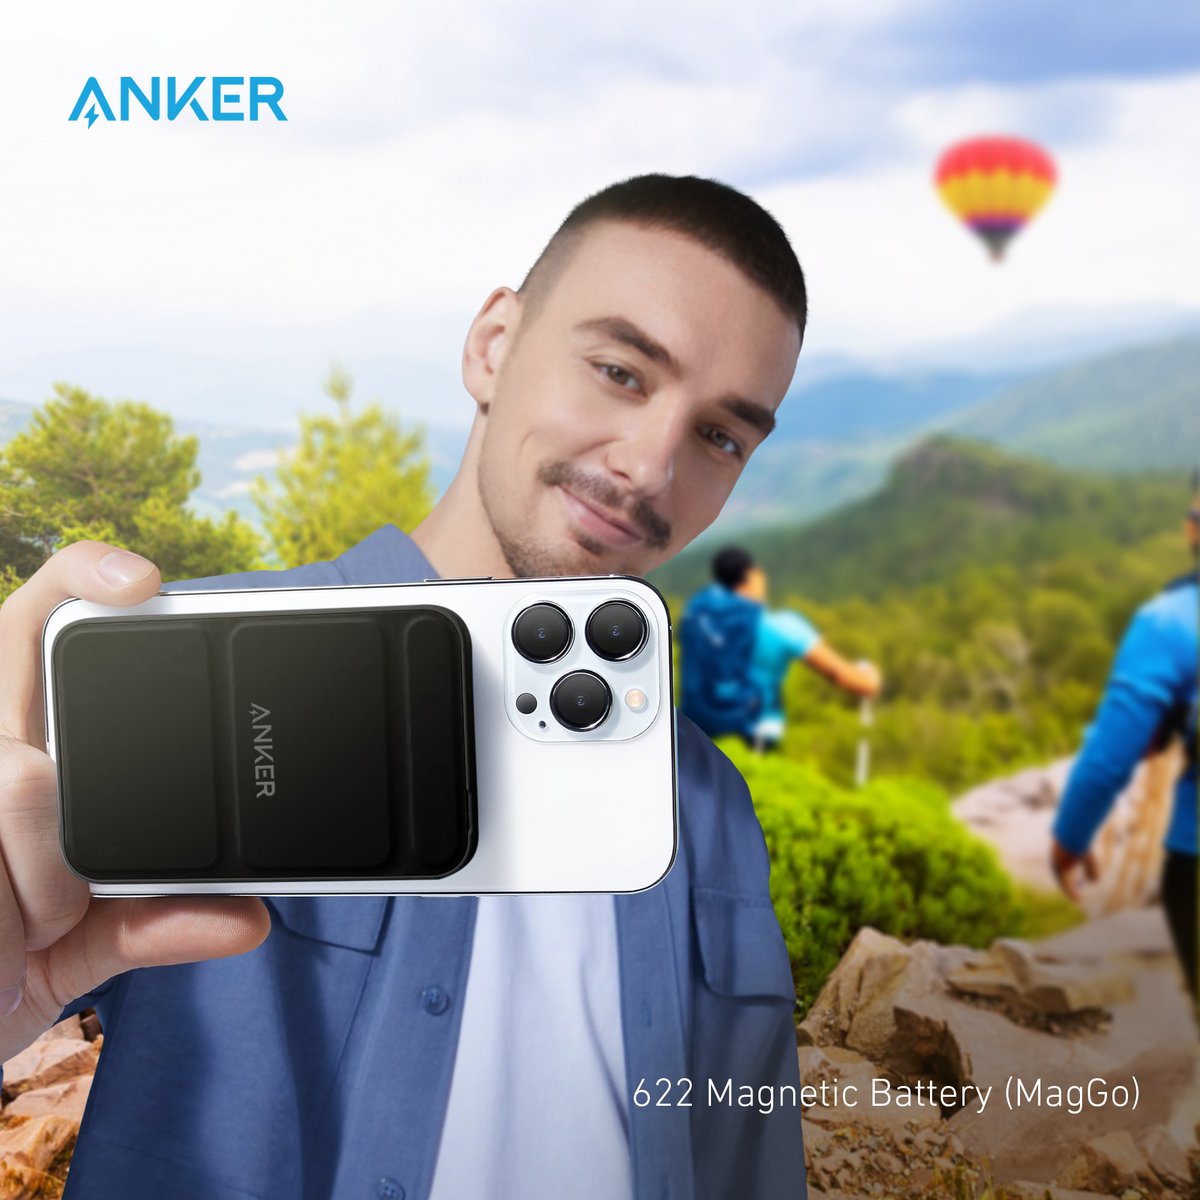 Don't let a drained battery dull your outdoor experience. Elevate your adventures with the #Anker 622 Magnetic Battery (MagGo).📷

Get yours from ankerza.co.za/tl-anker-622 today!

#PortableCharger #PowerOnTheMove #MagGoAdventures #StayChargedStayConnected #PowerOnTheGo #LiveCharged